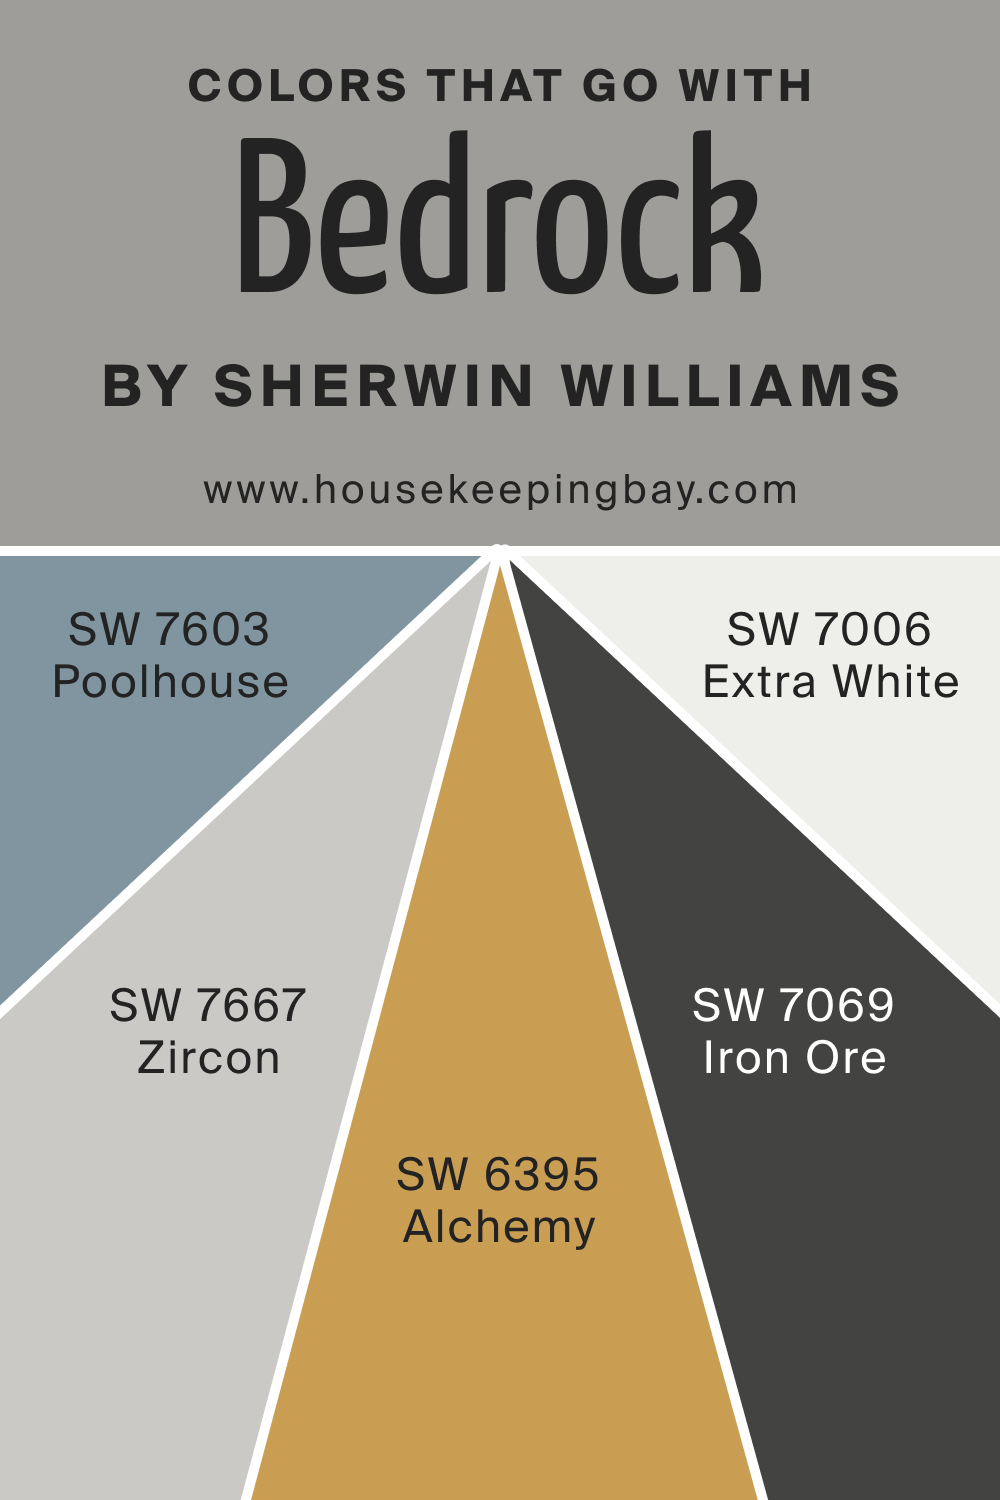 Colors that goes with SW 9563 Bedrock by Sherwin Williams